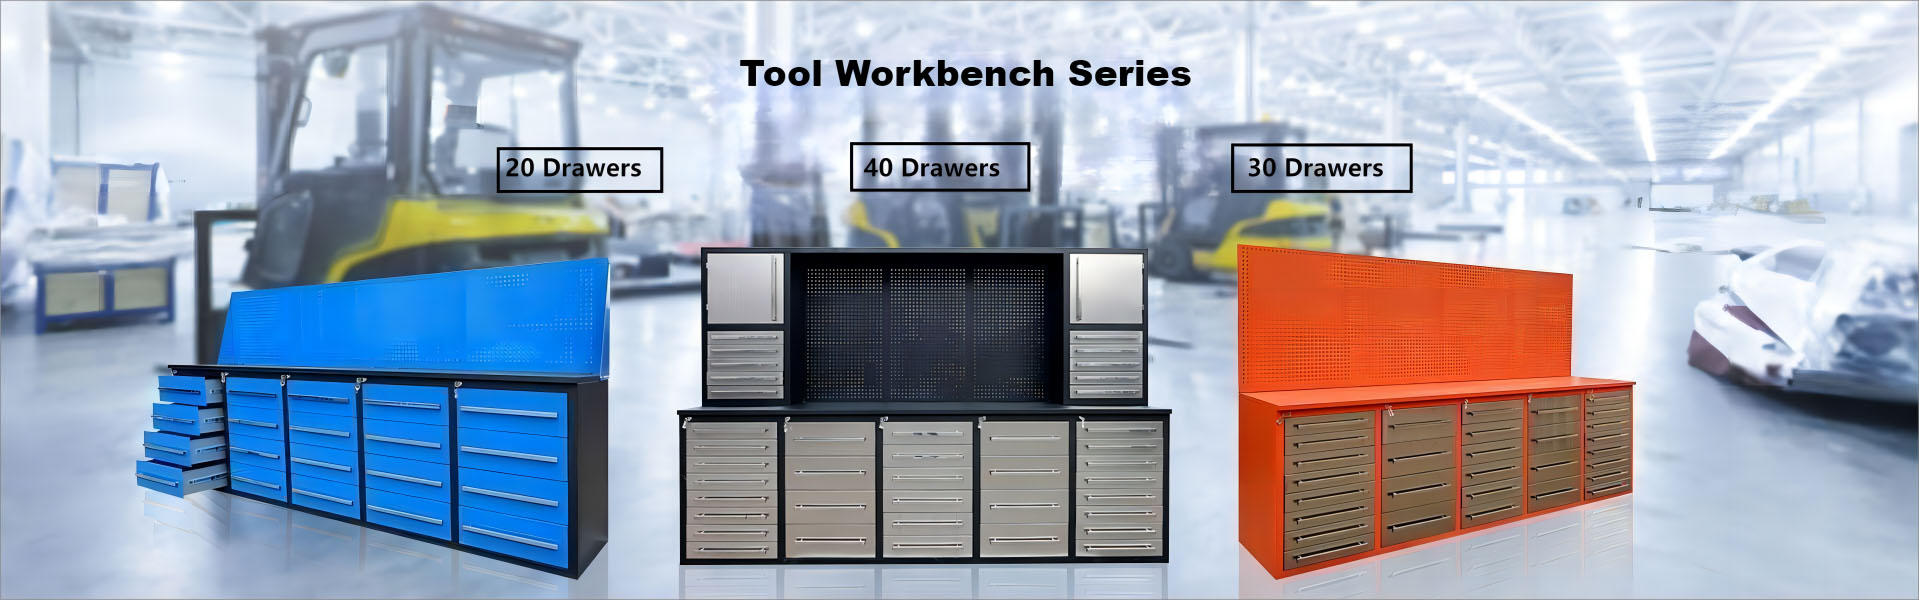 Stainless Steel Tool Workbench